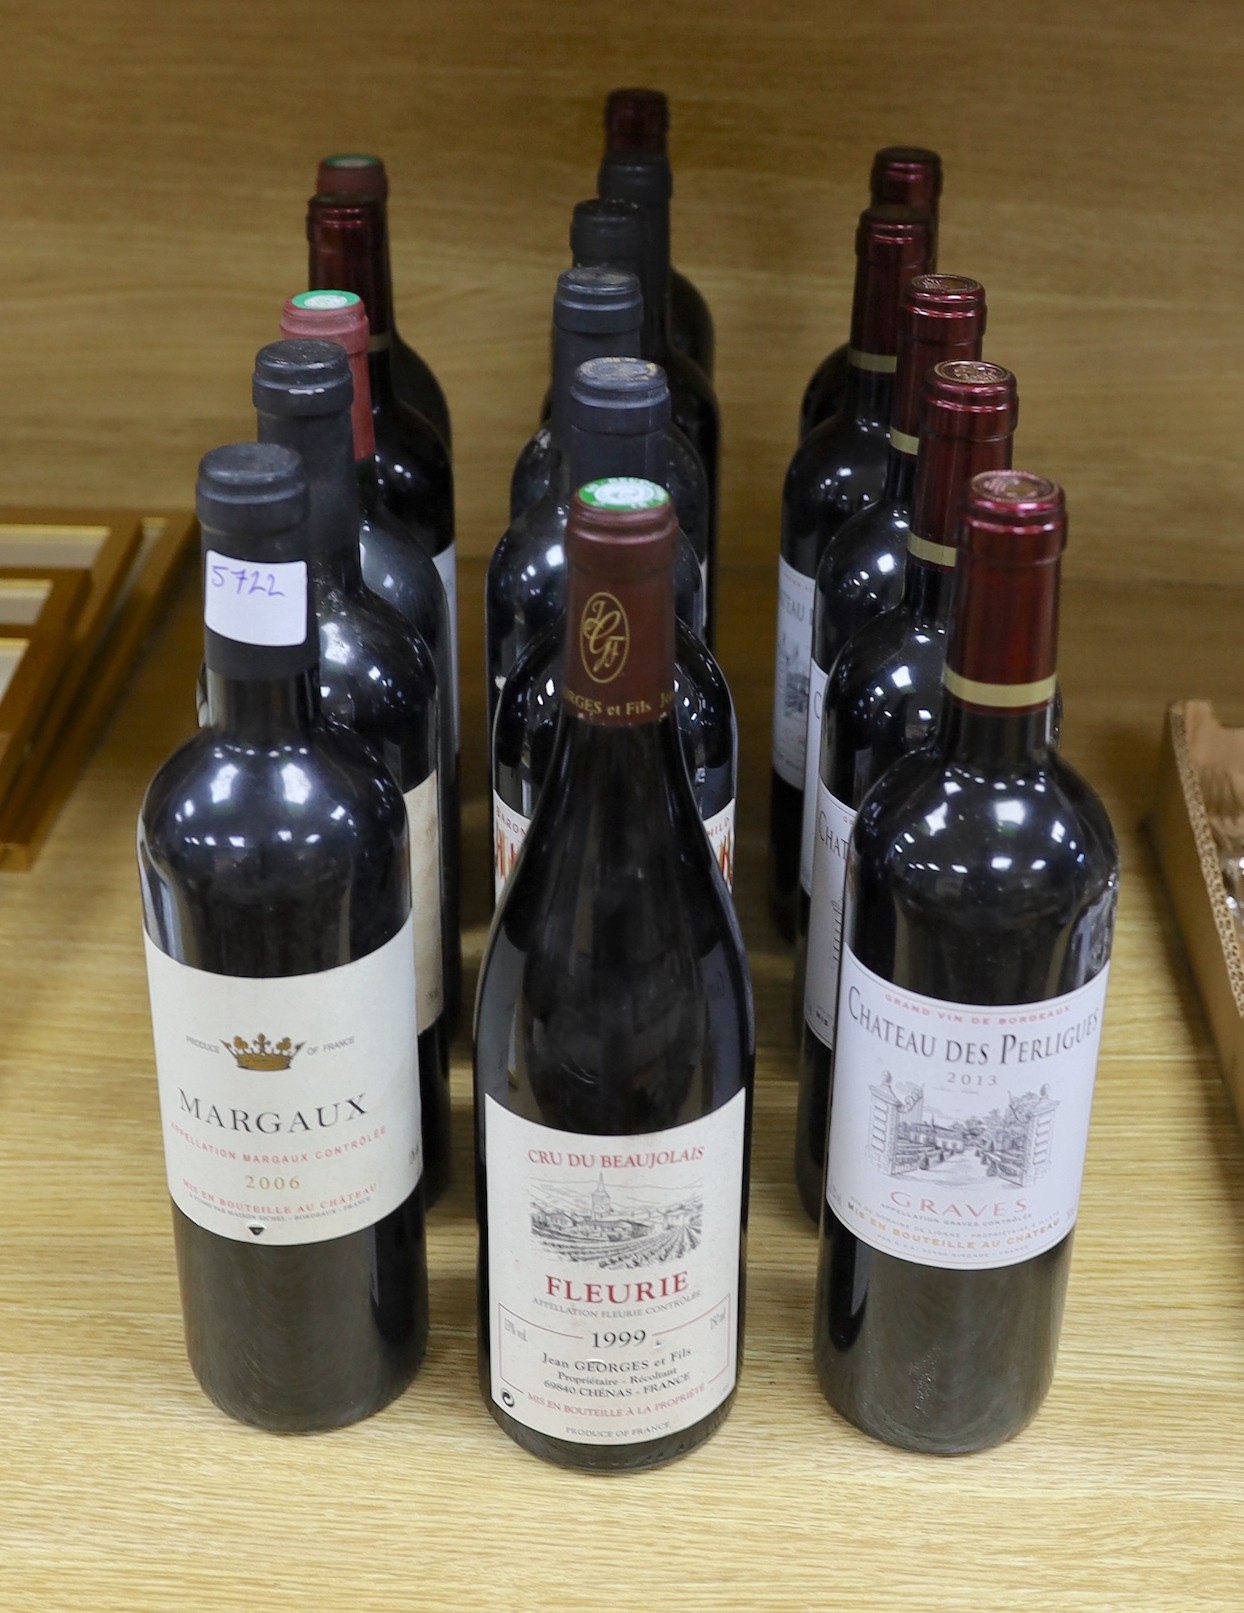 16 various bottles of red wine to include 7 bottles of Chateau des Perligues 2013, 5 bottles of Margaux 2006, etc.